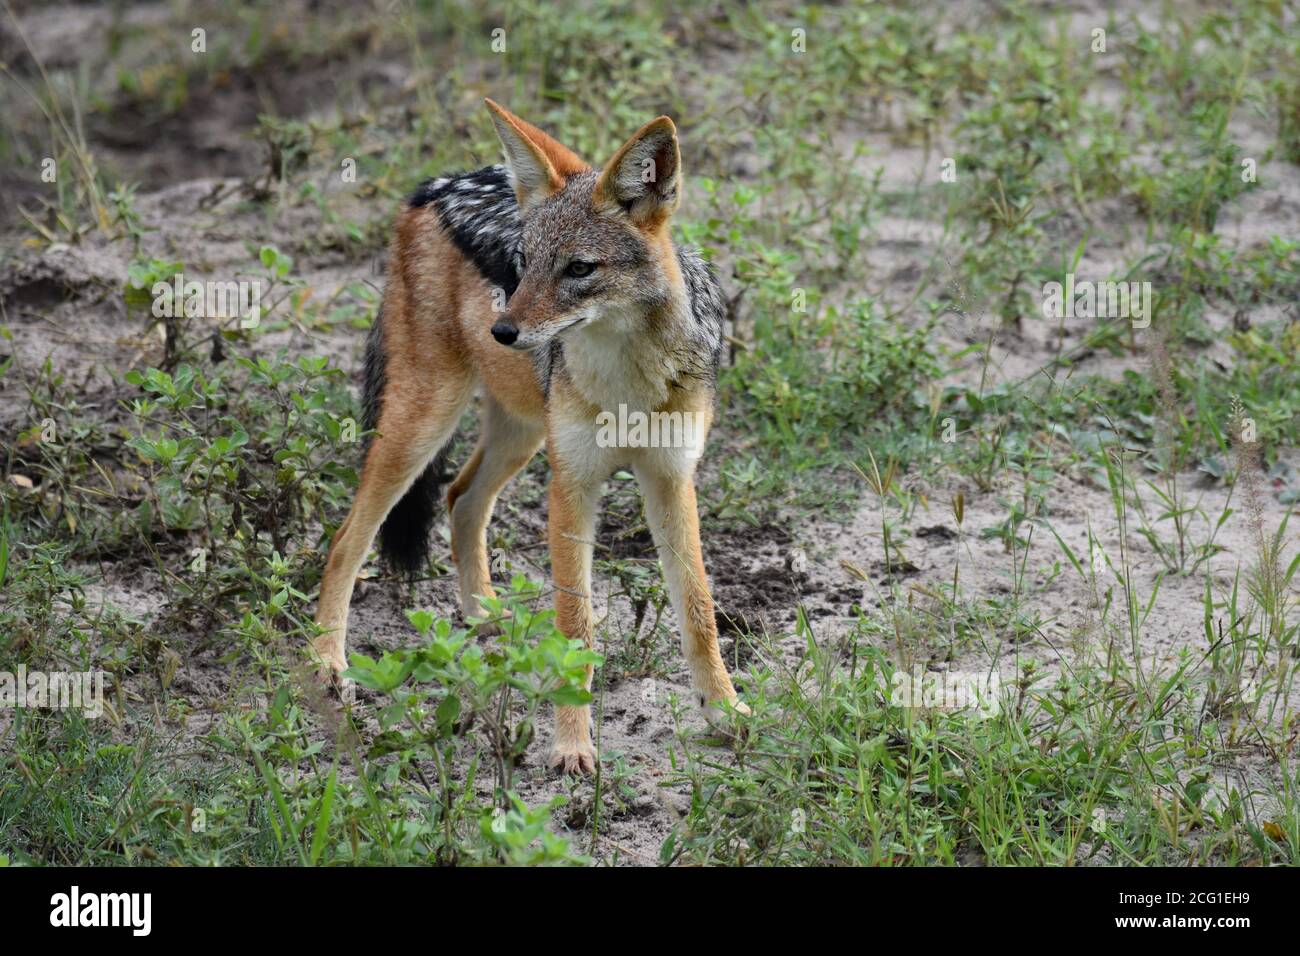 A Black-Backed Jackal (Canis mesomelas or Lupulella mesomelas) looking alert stood on sand with foliage growing in Chobe National Park, Botswana Stock Photo